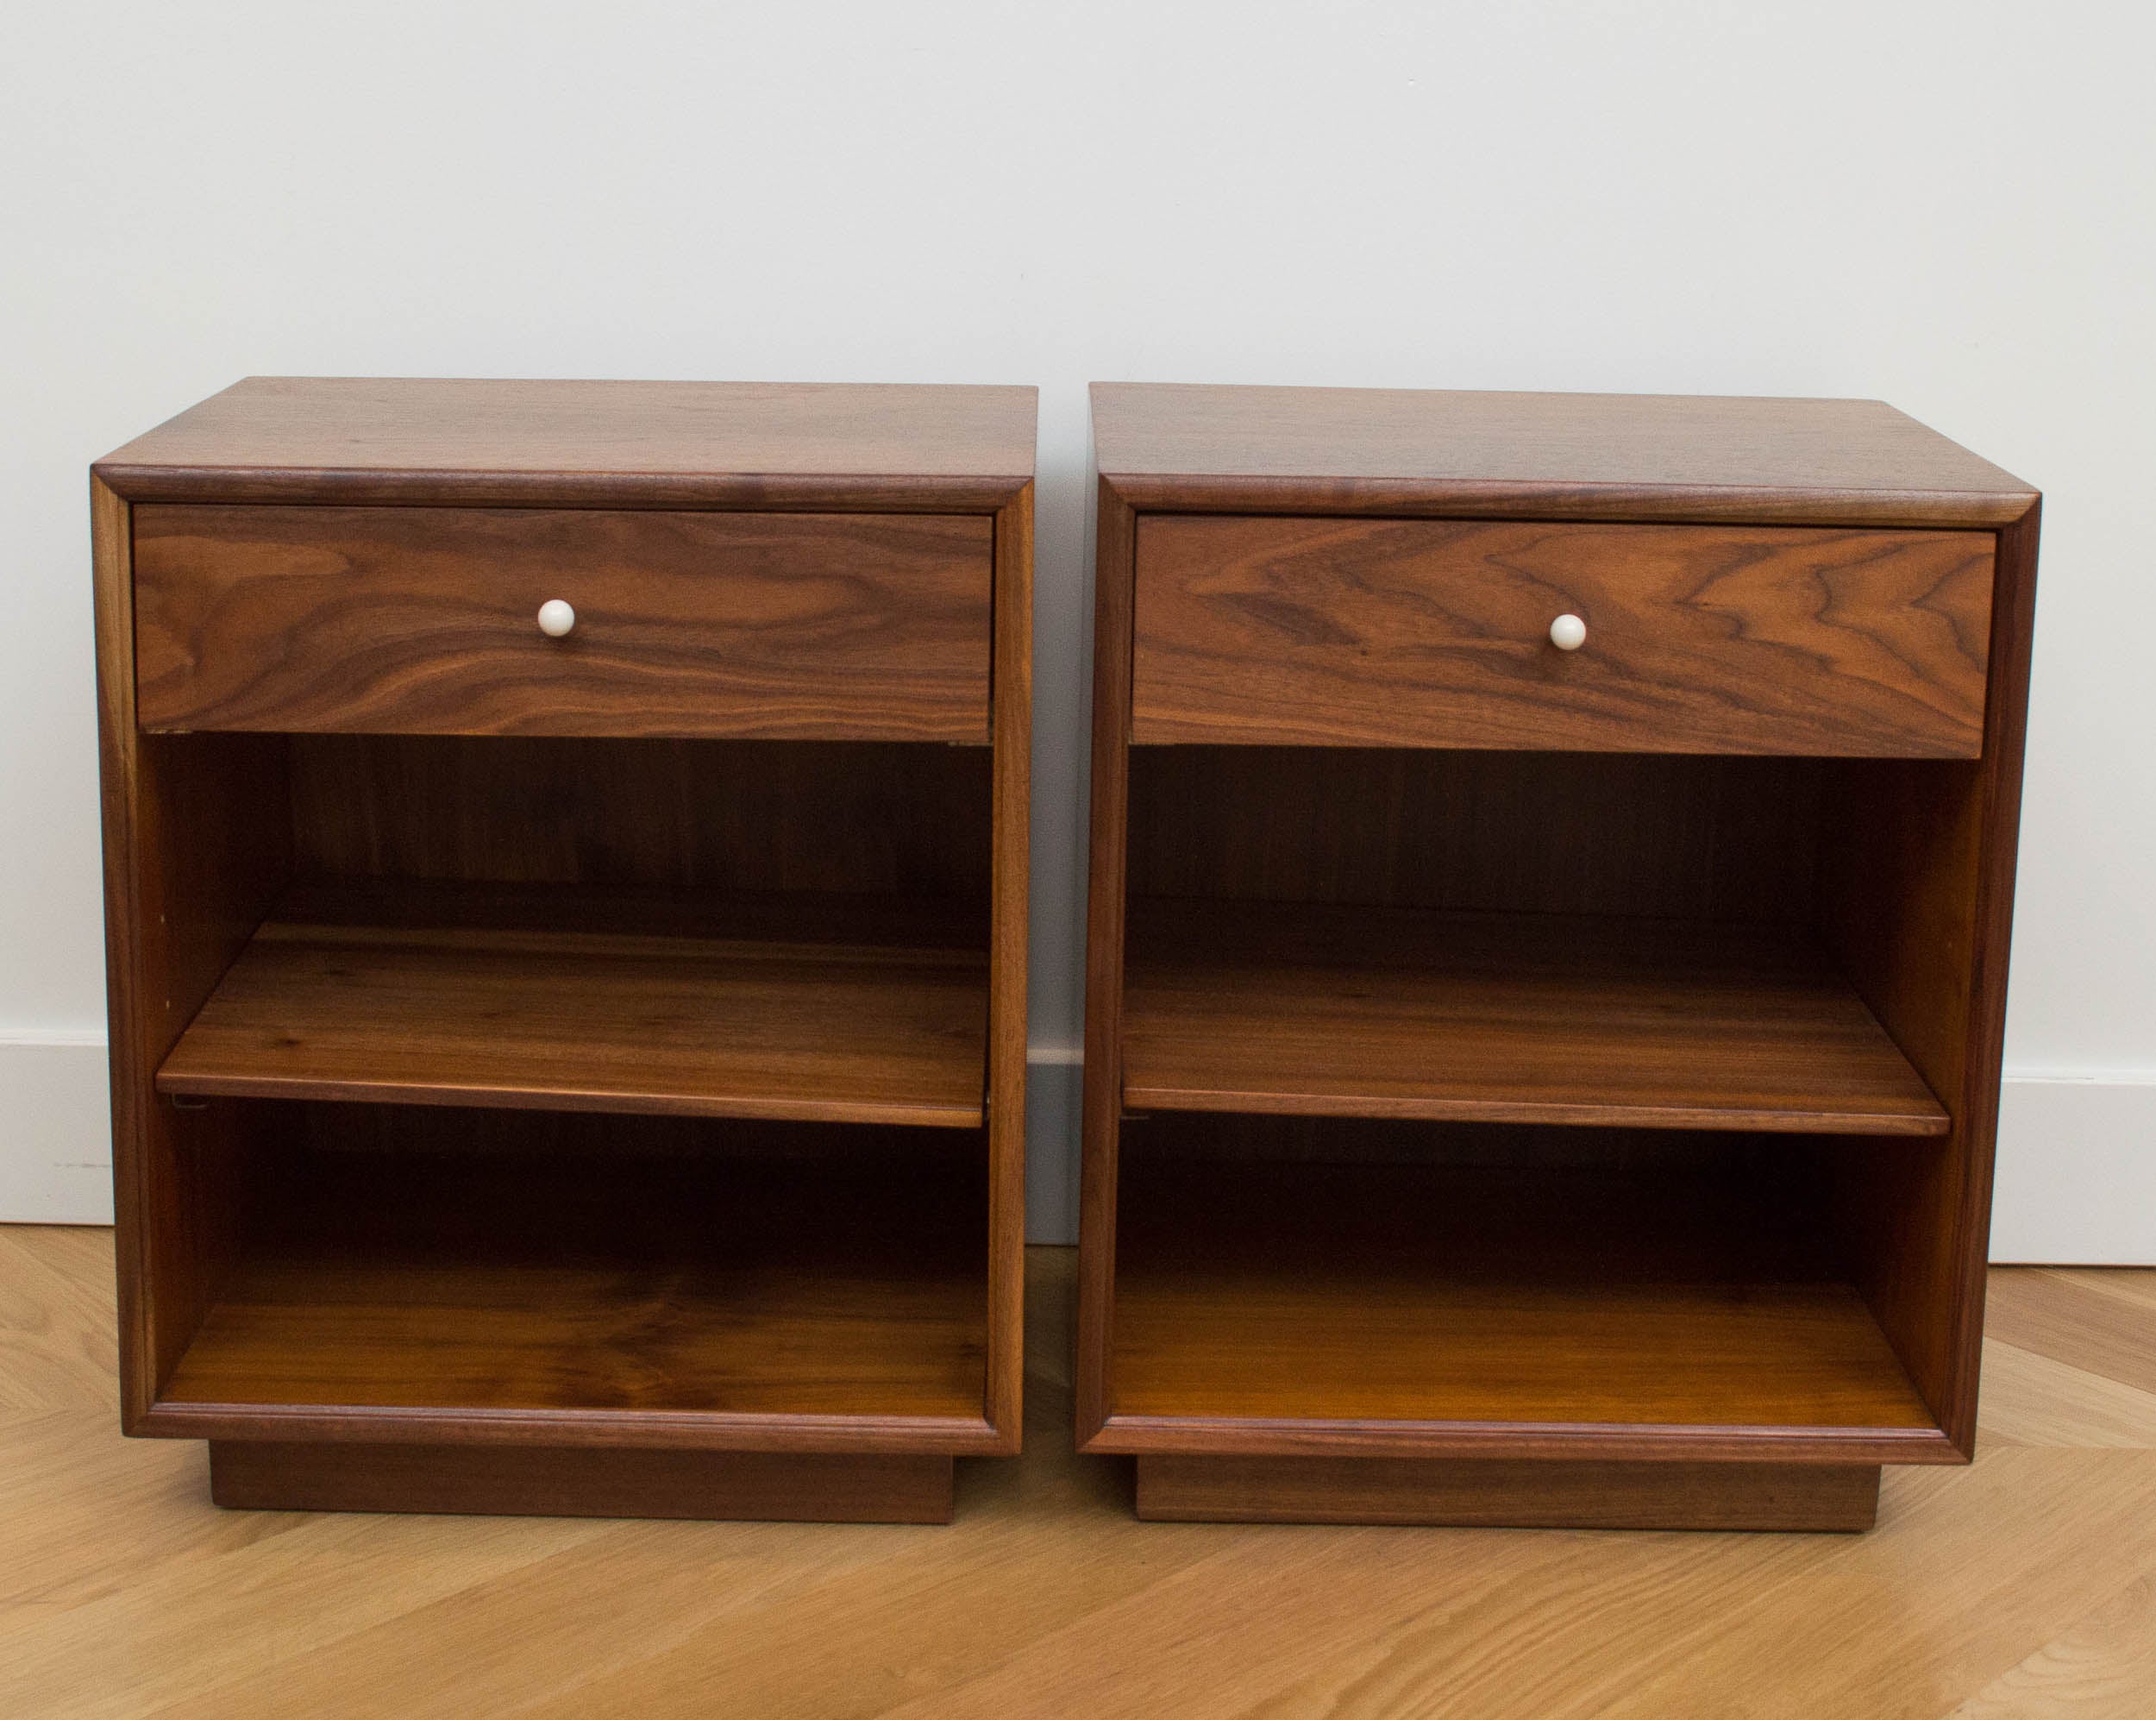 Kipp Stewart for Drexel Furniture Co. walnut nightstands.
Also have the original marble tops that are not photographed.